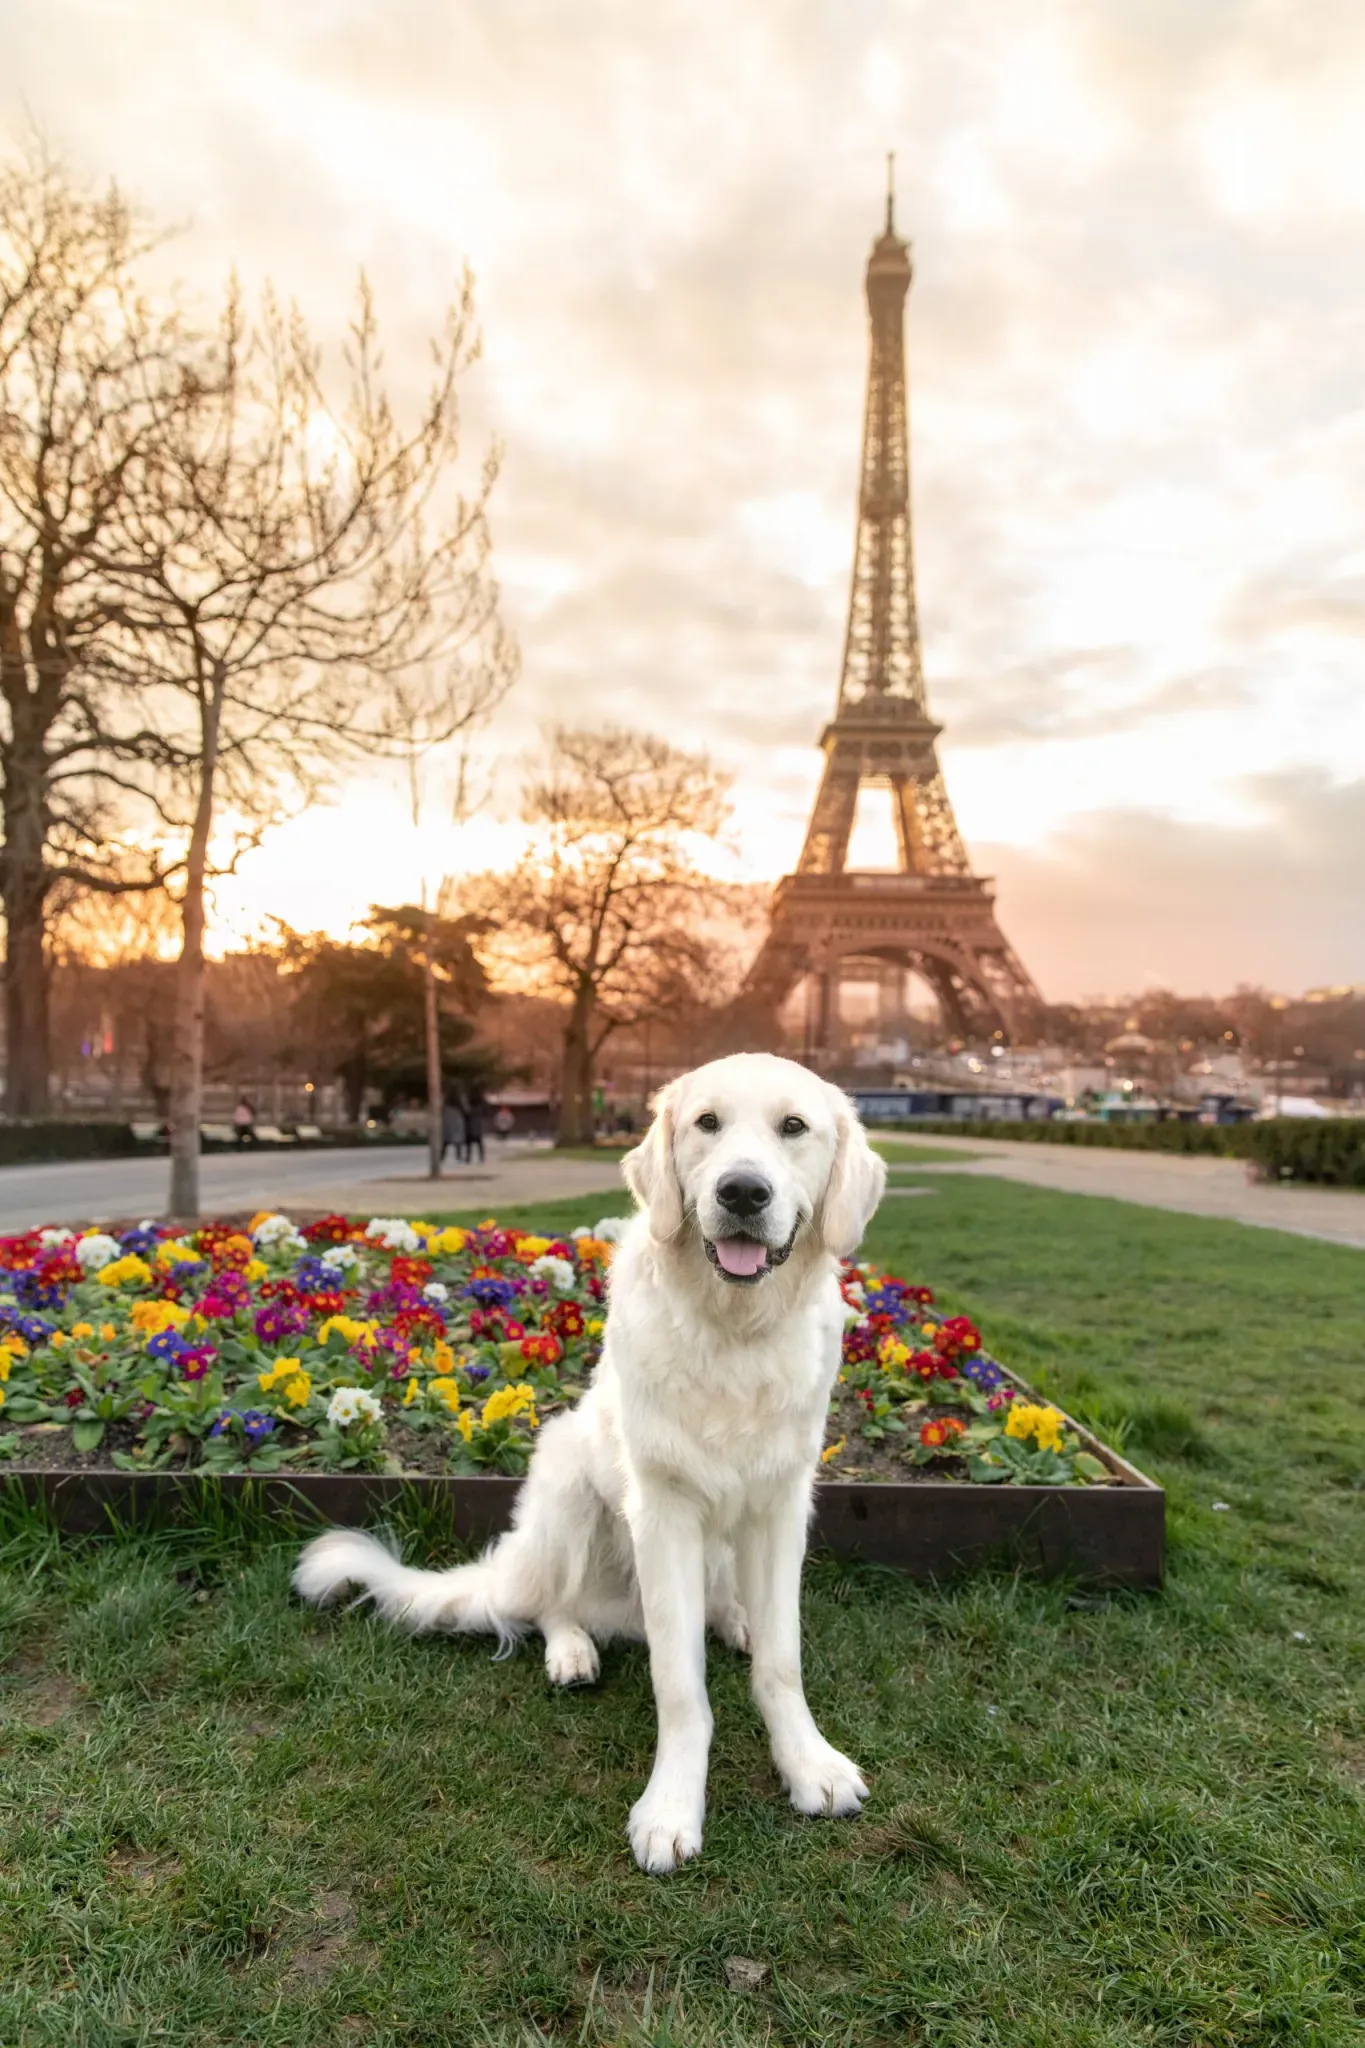 Dog Friendly Travel Ideas: Iconic Tourist Attractions